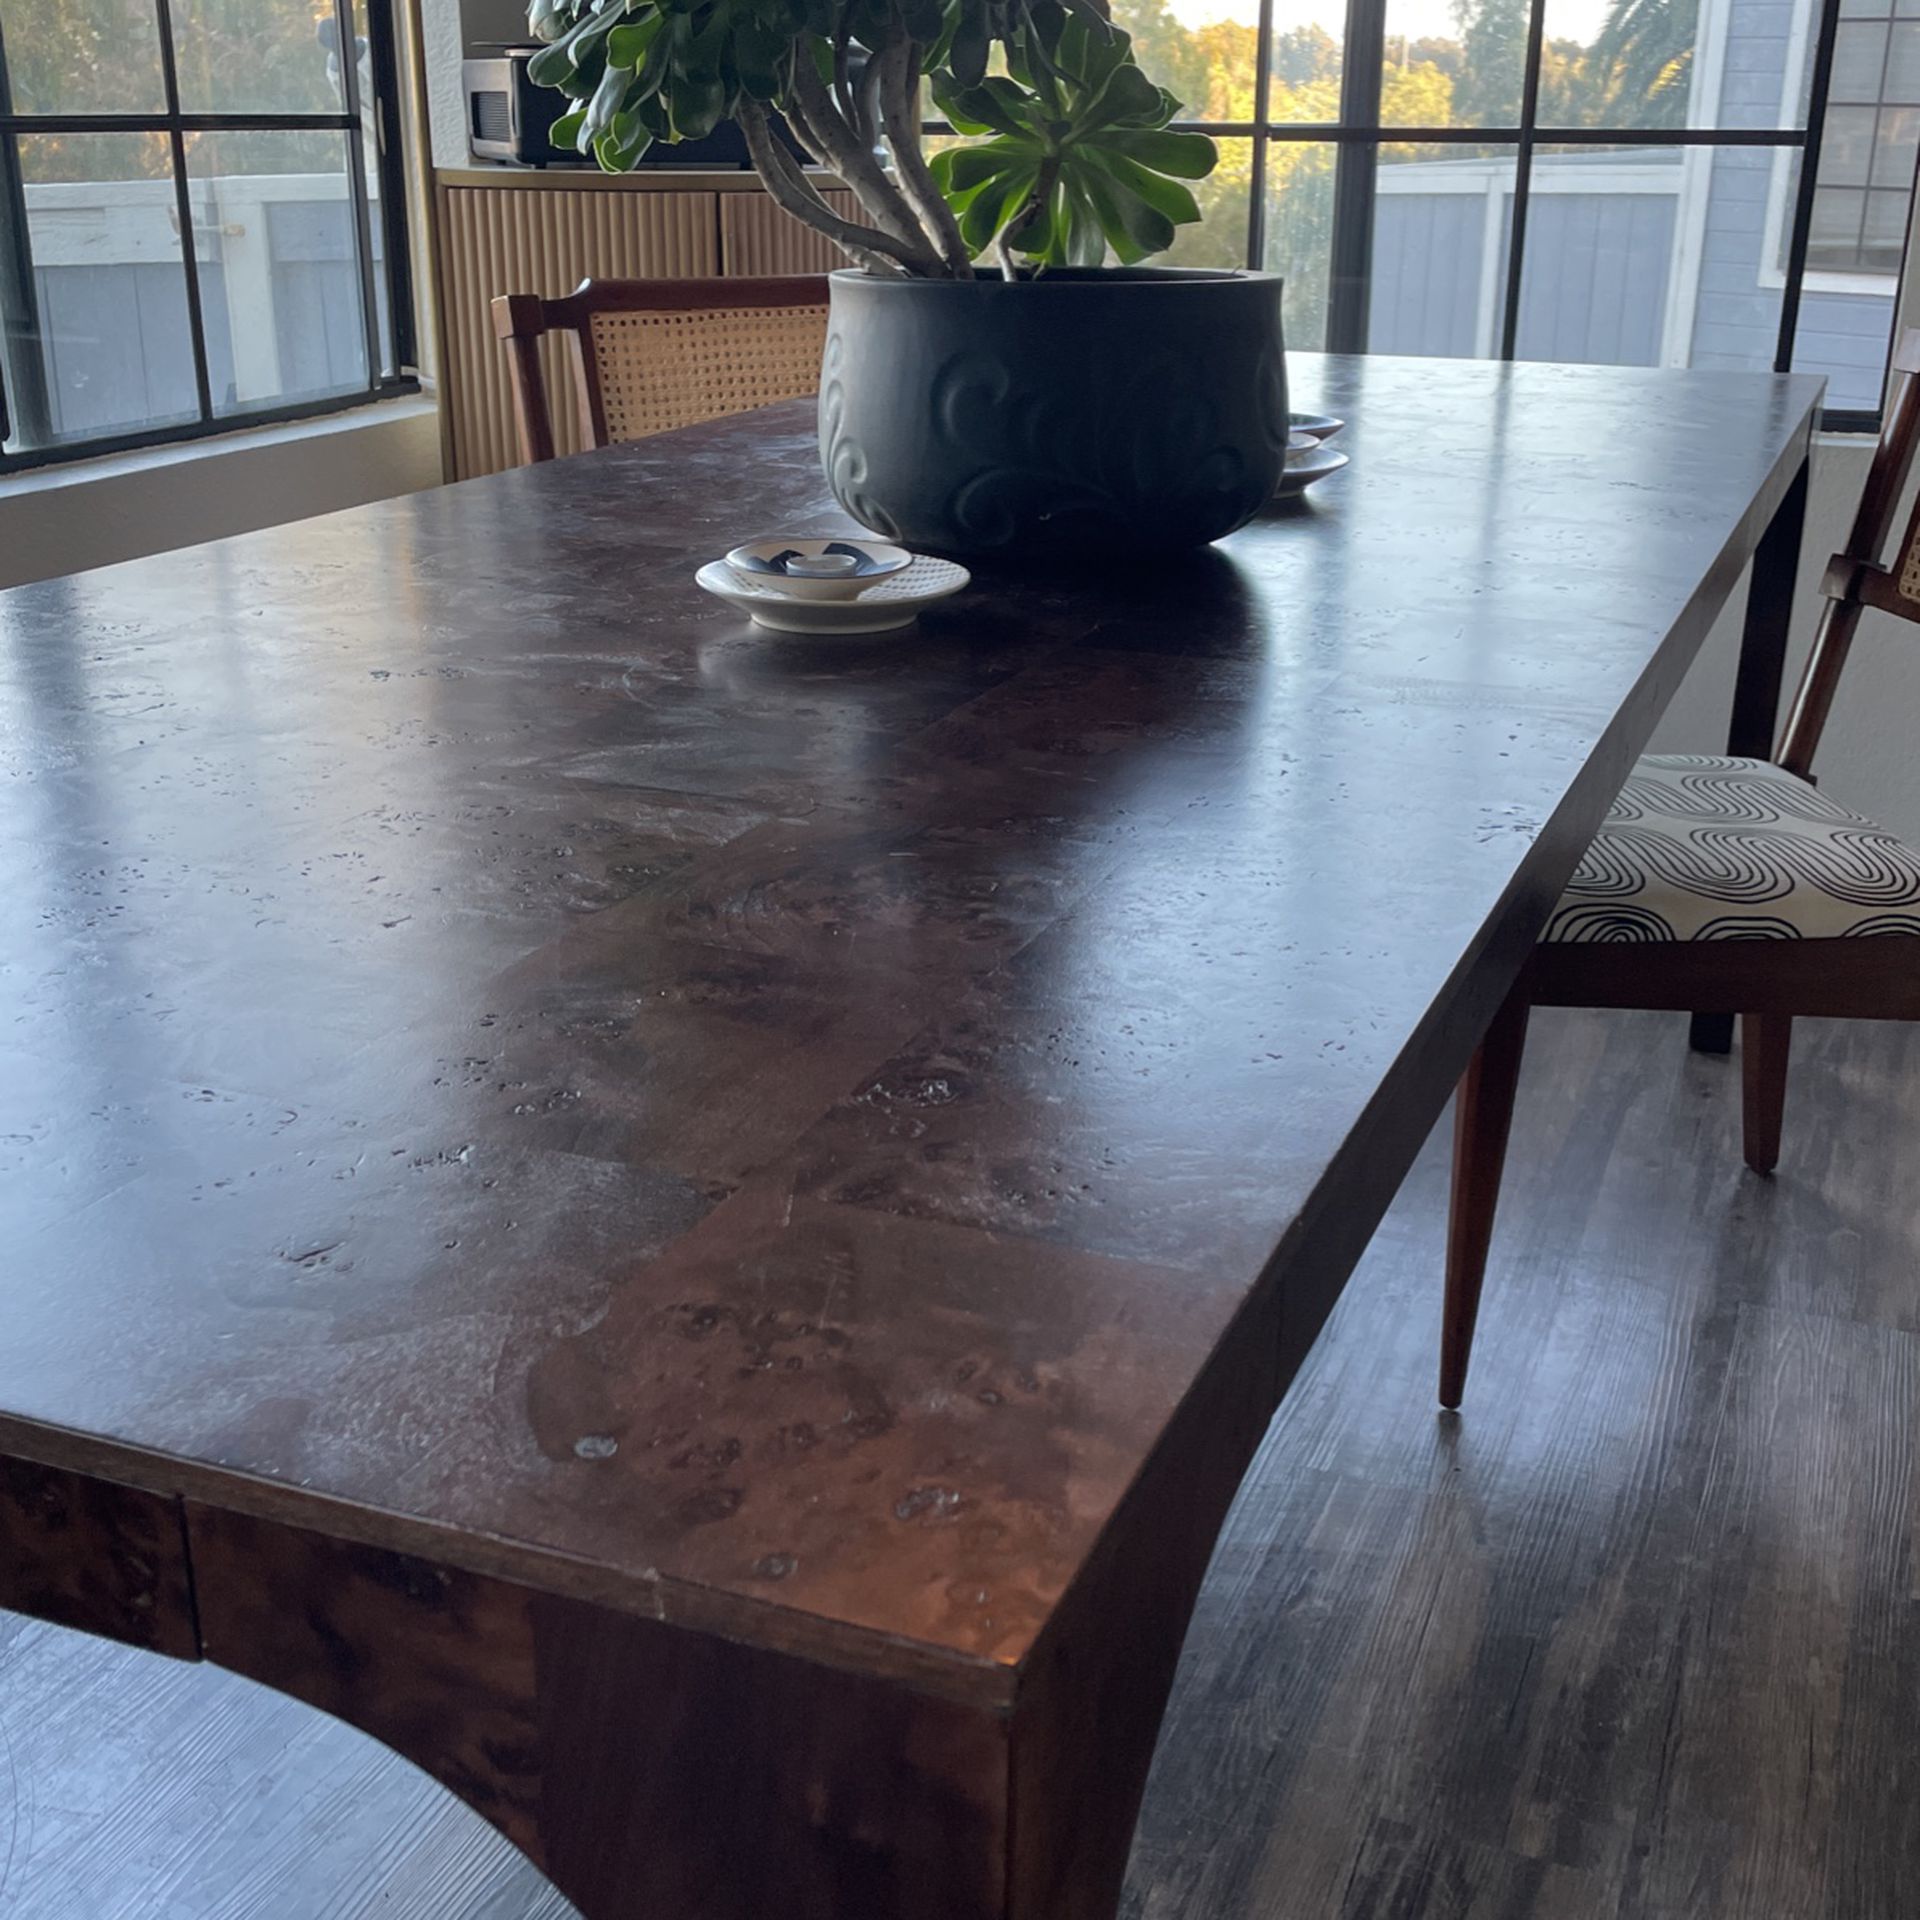 Tall Burled Wood Pedestal Table + Reviews